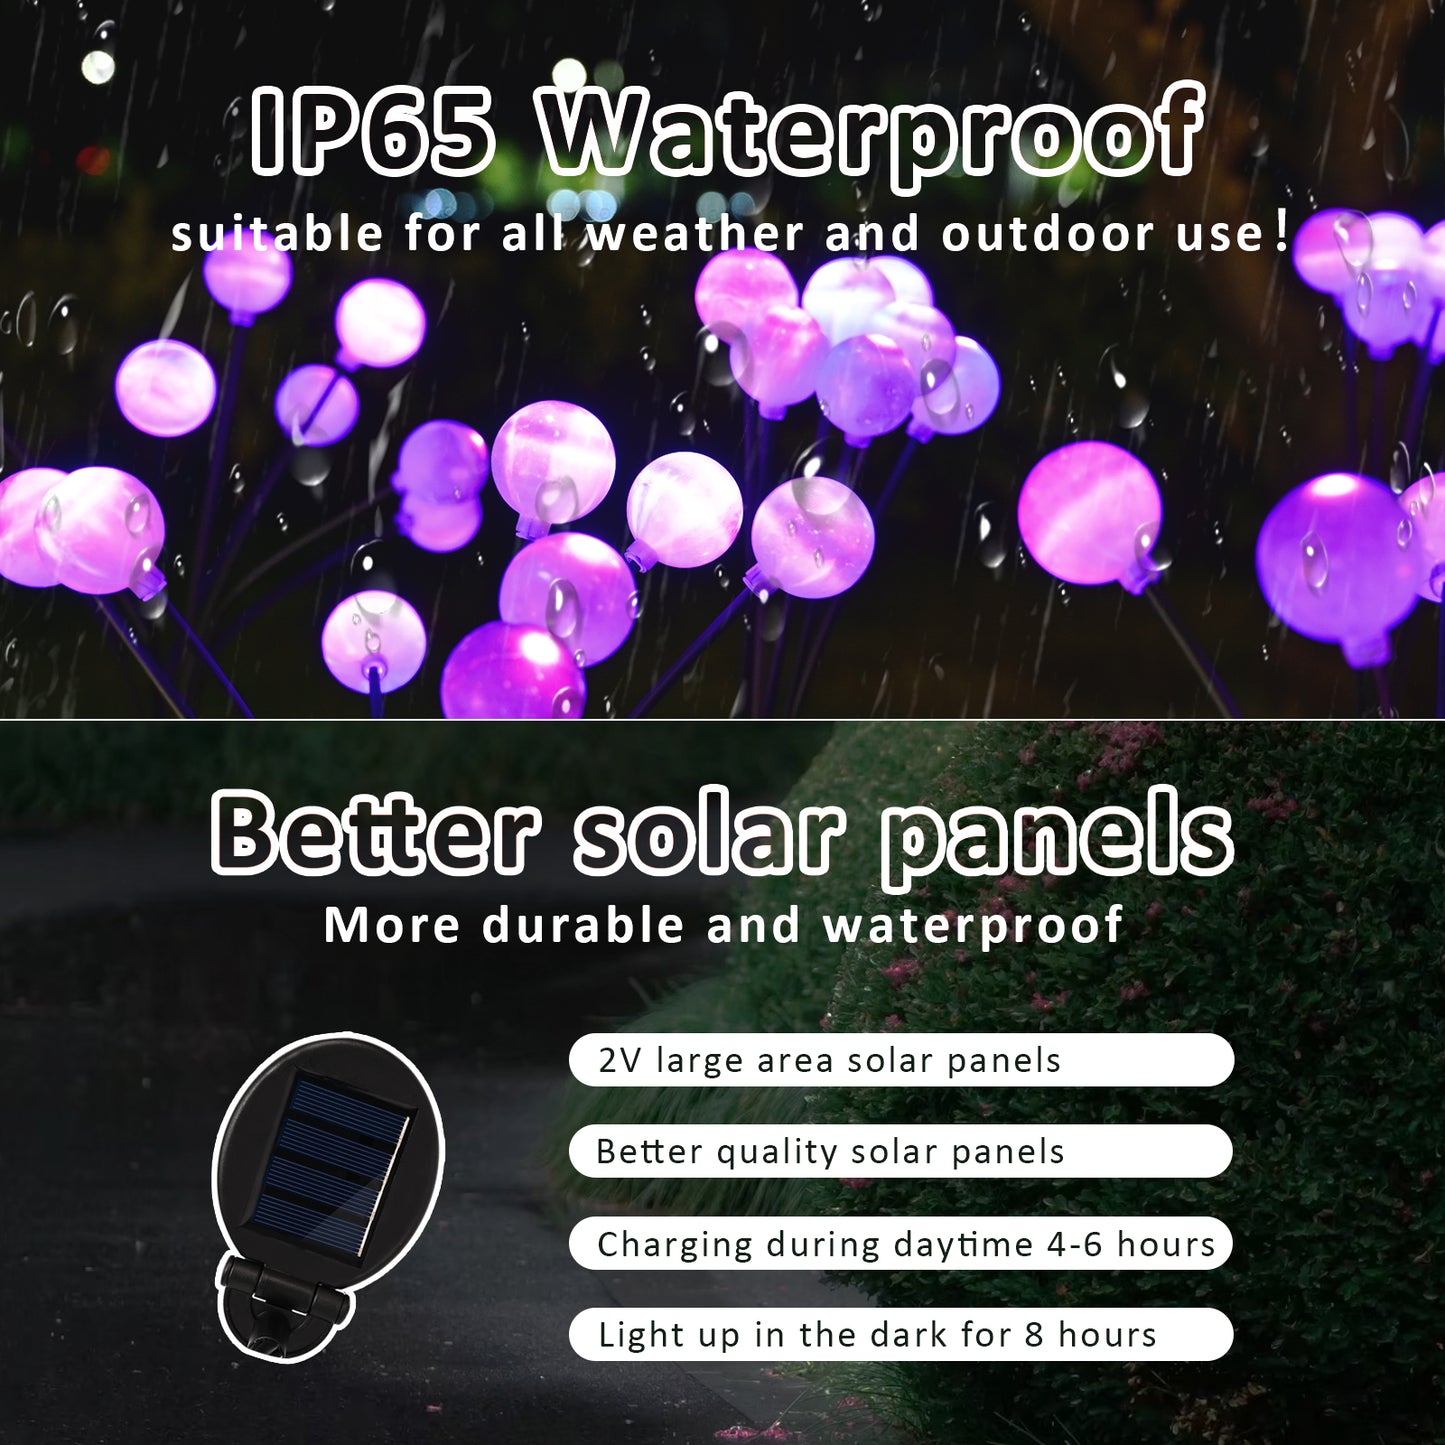 🌕Planet Solar Light： put the entire galaxy into your backyard